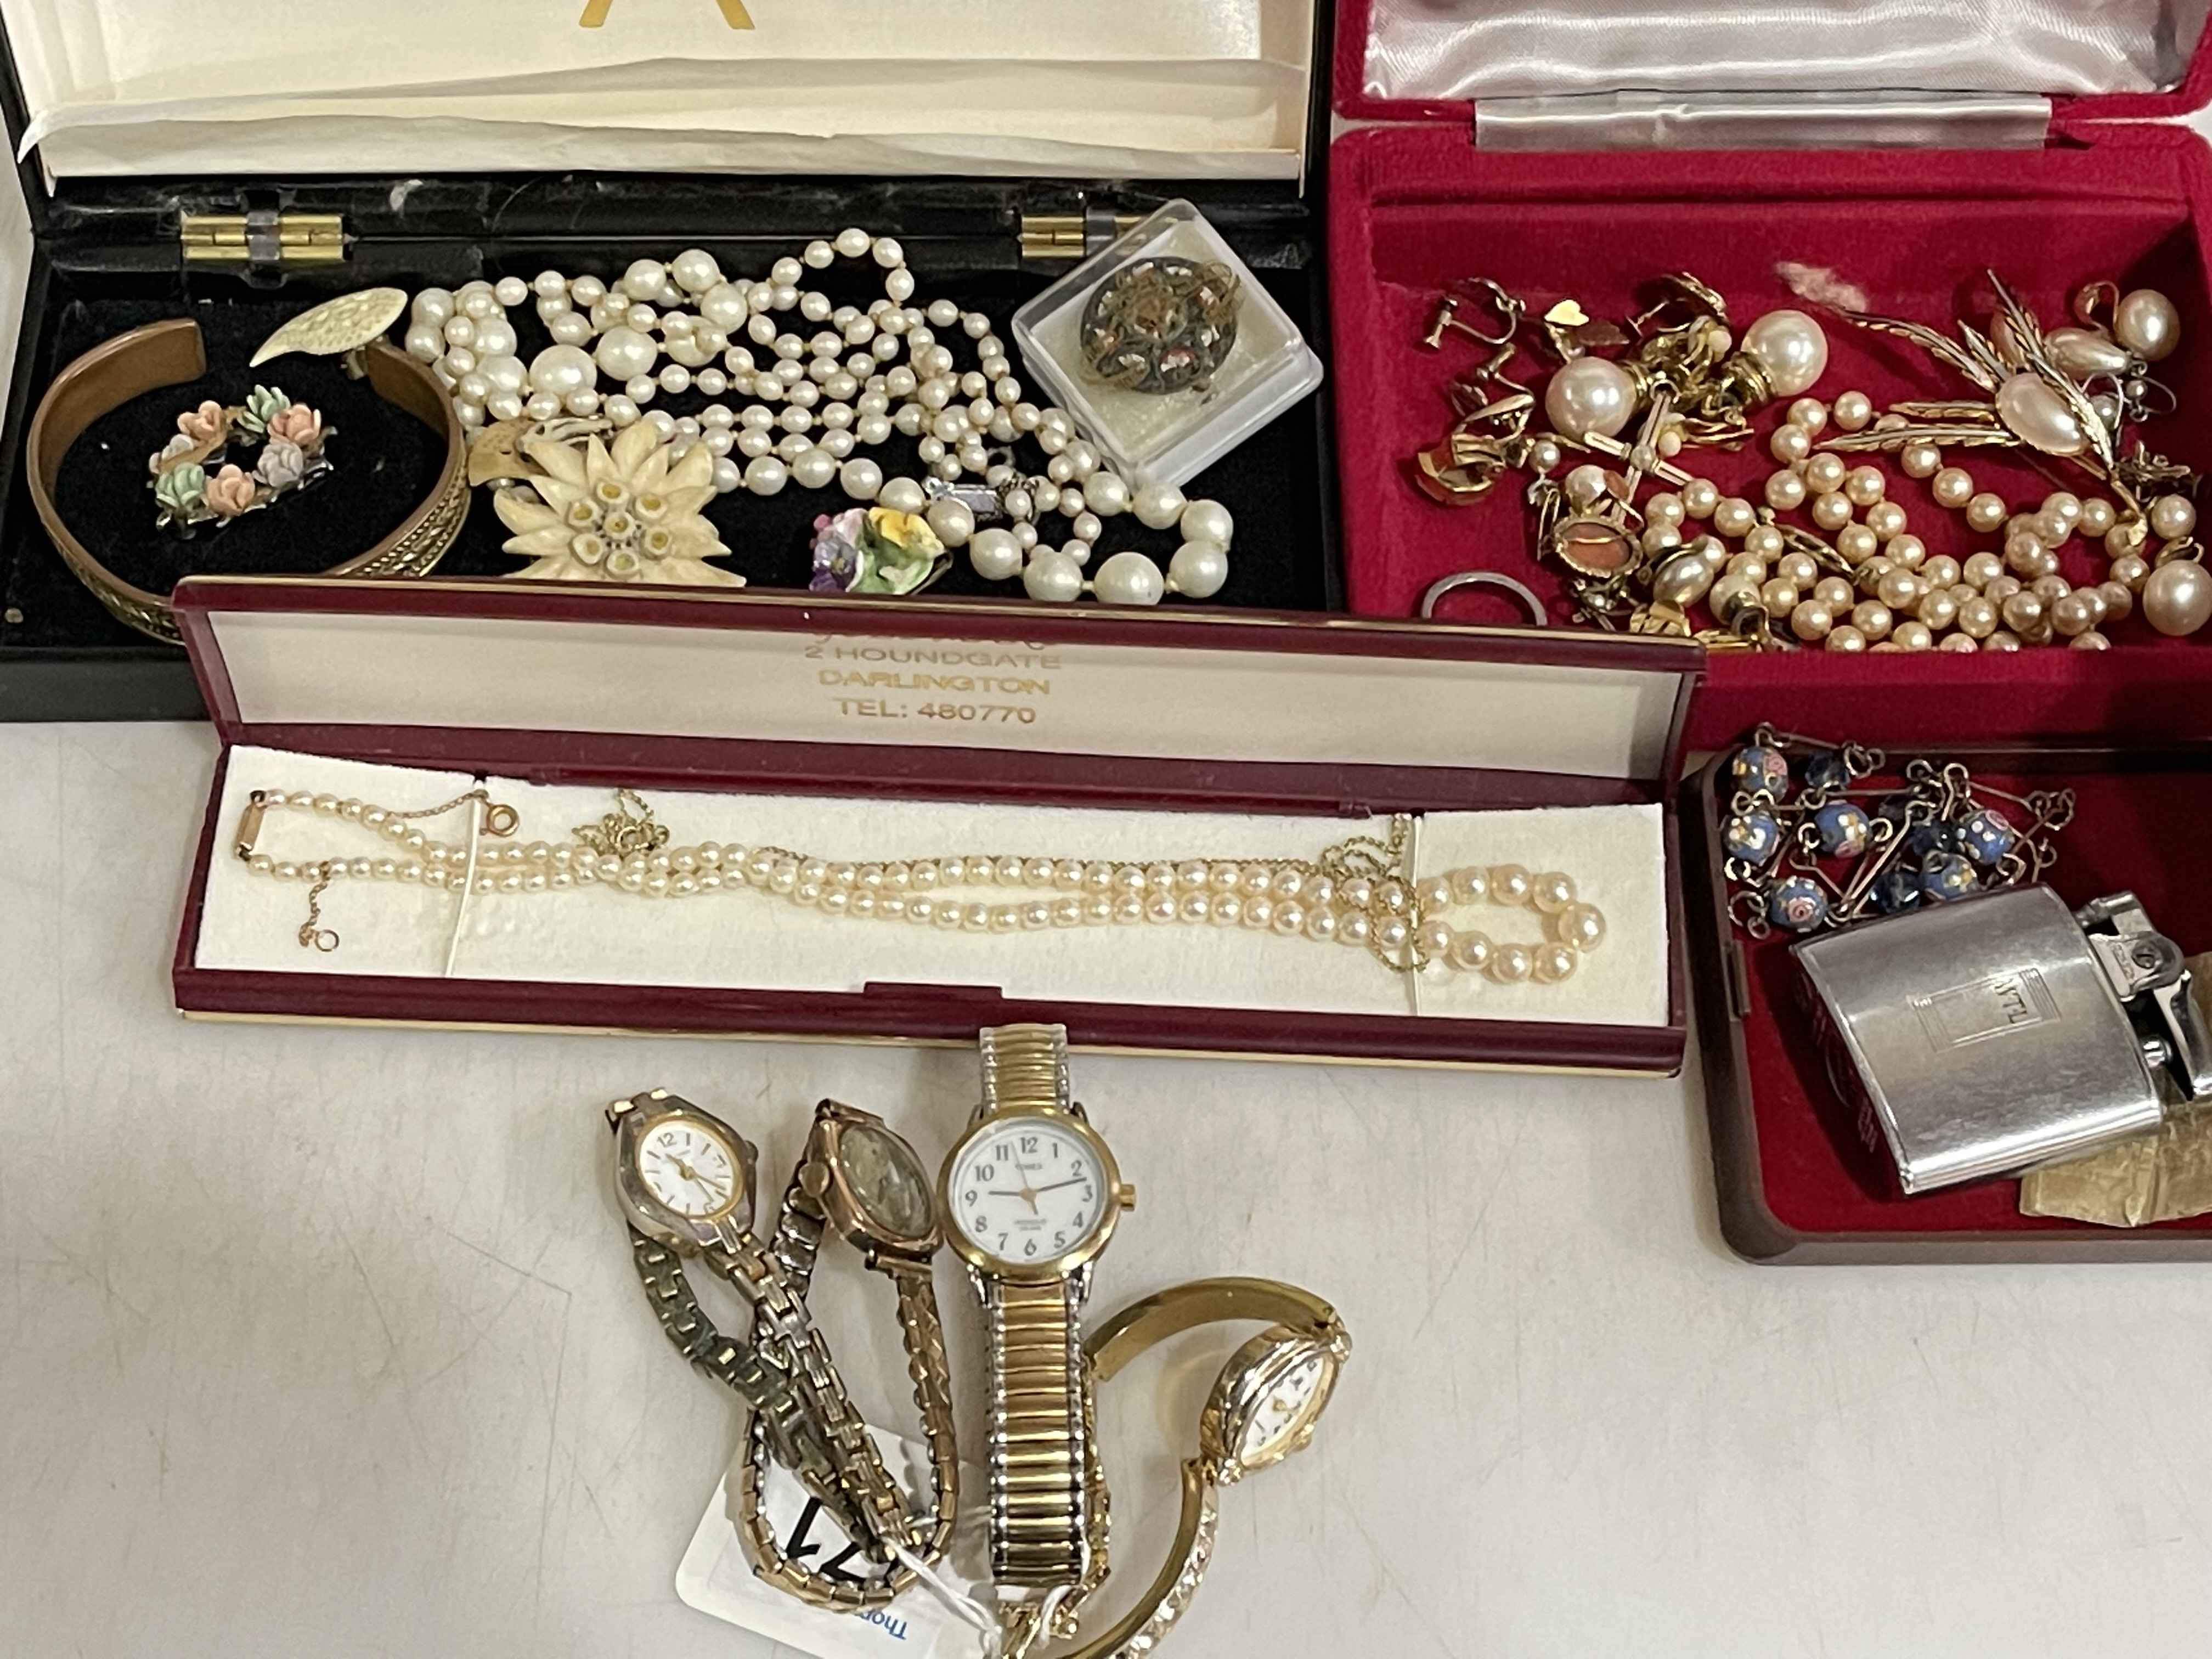 Four wristwatches including one gold, pearl necklace, 9 carat gold St.